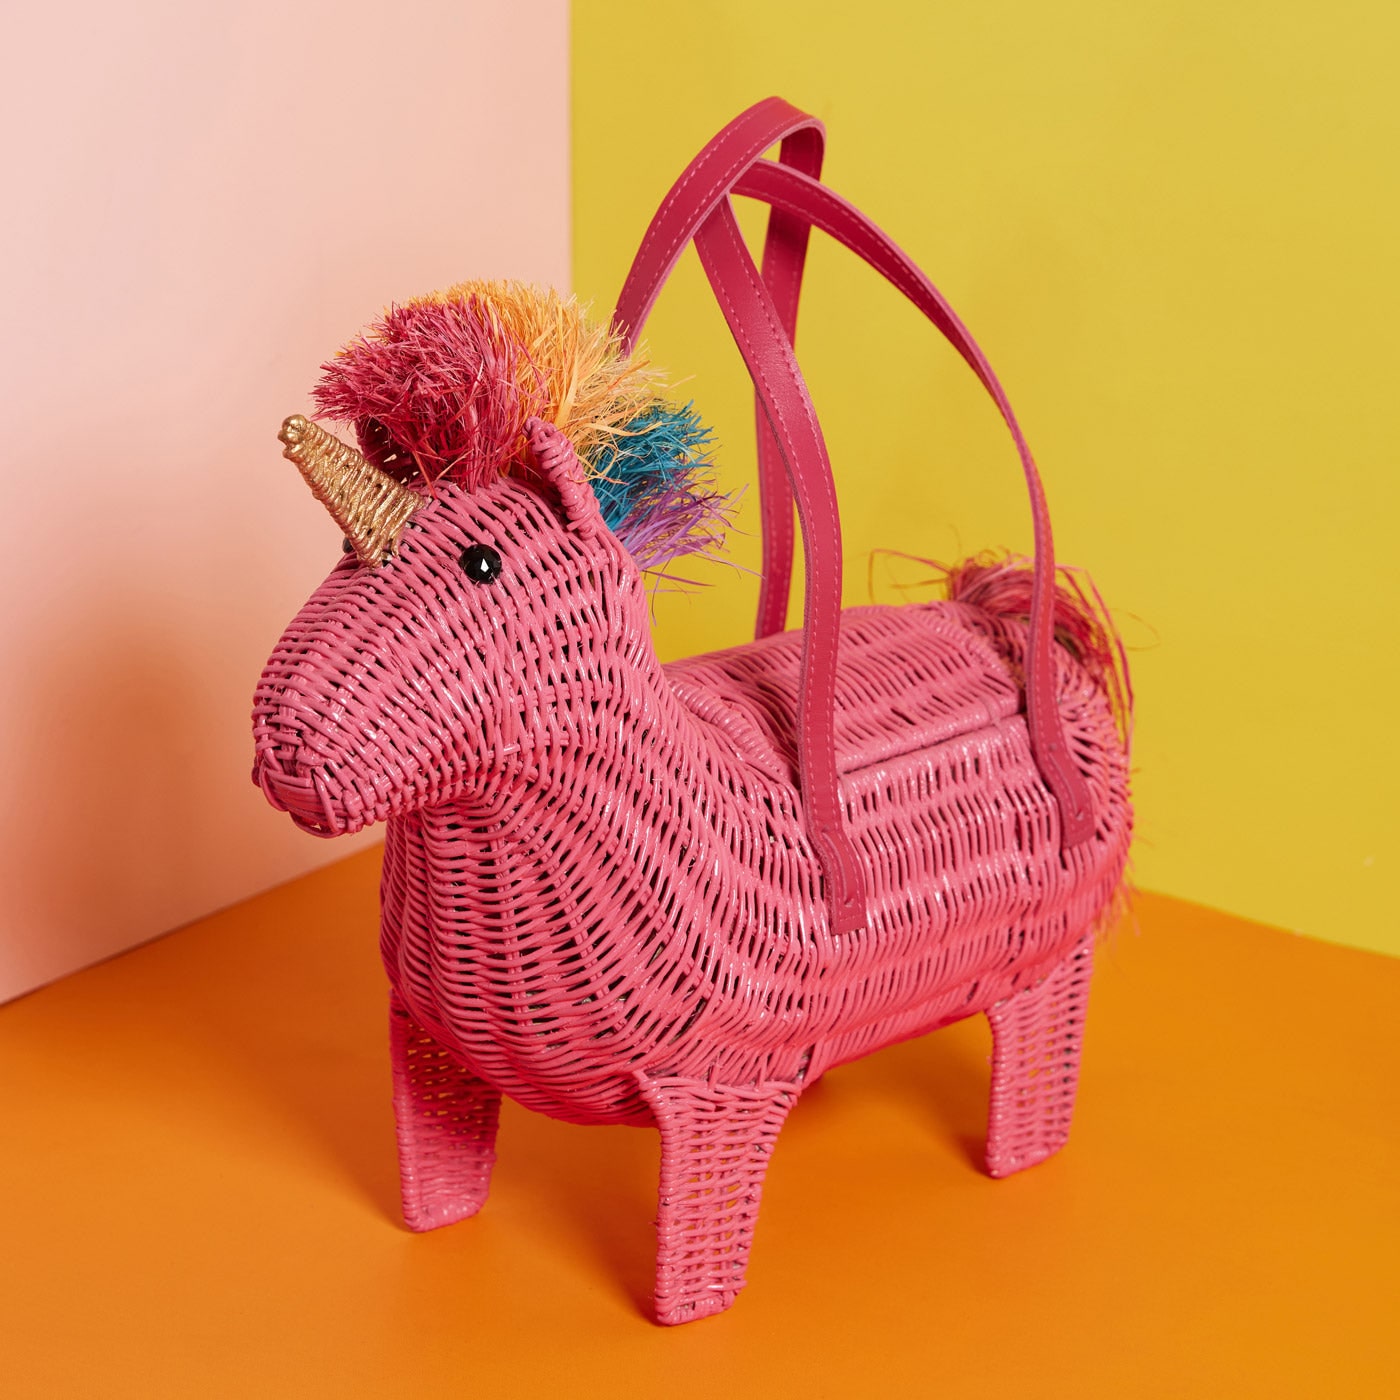 Wicker Darling's Viola the pink unicorn purse on a colourful background